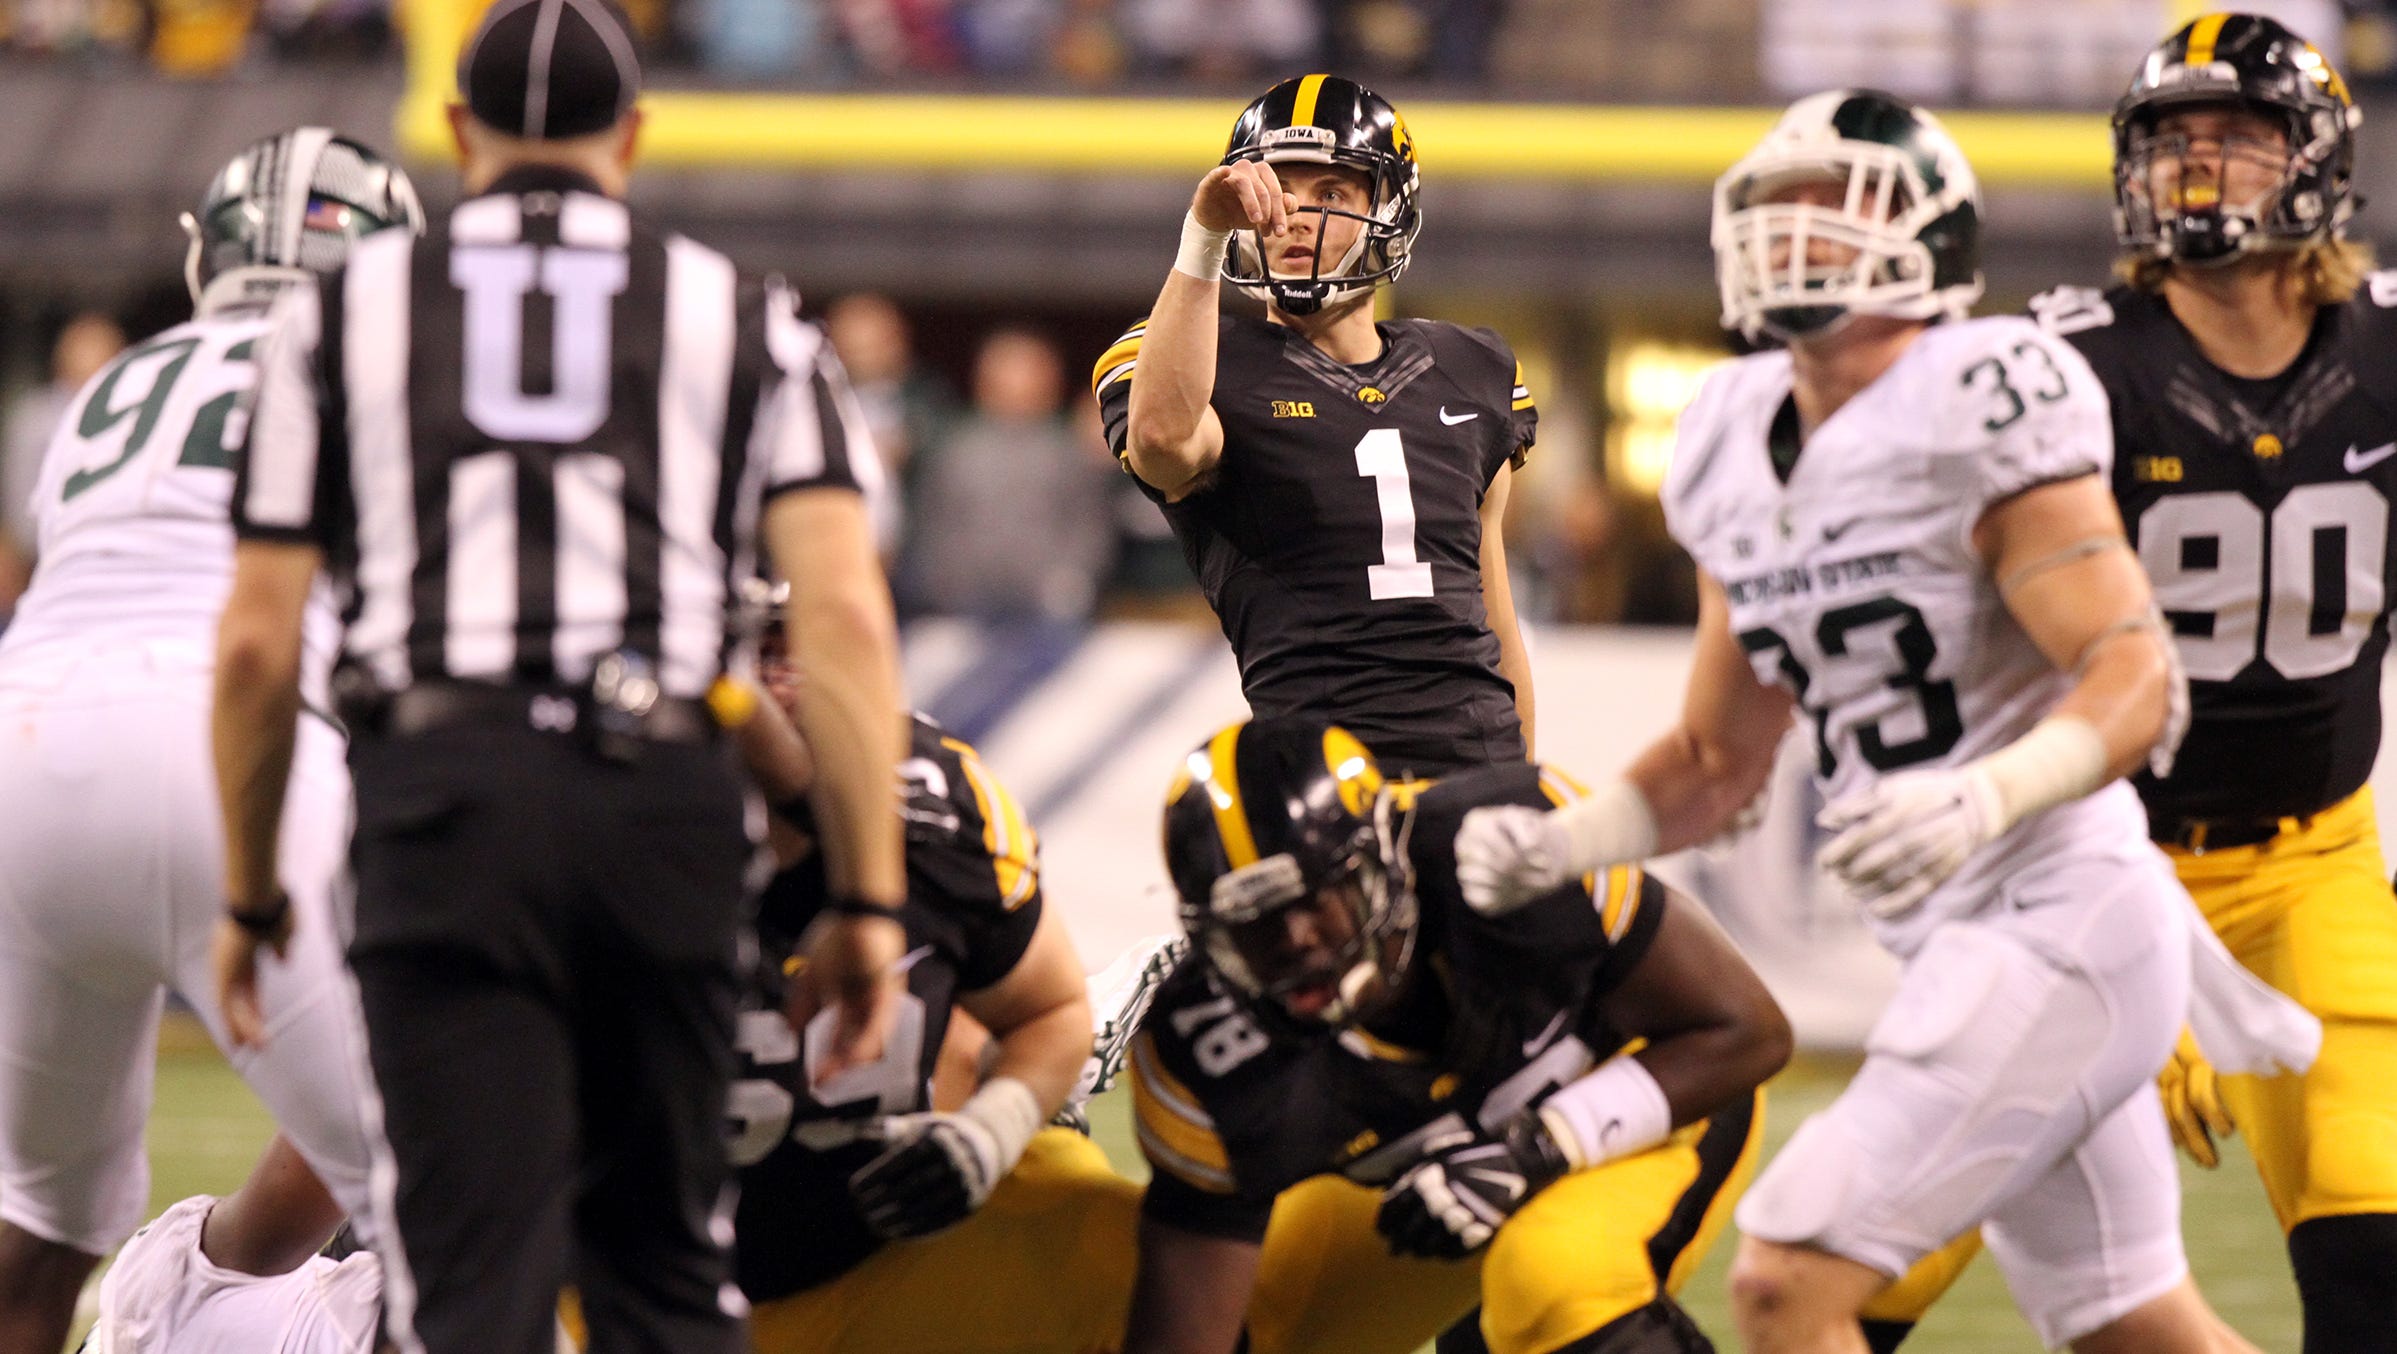 Iowa's Marshall Koehn kicks a field goal during the Hawkeyes' Big Ten Championship game against Michigan State at Lucas Oil Stadium in Indianapolis, Ind. on Saturday, Dec. 5, 2015.